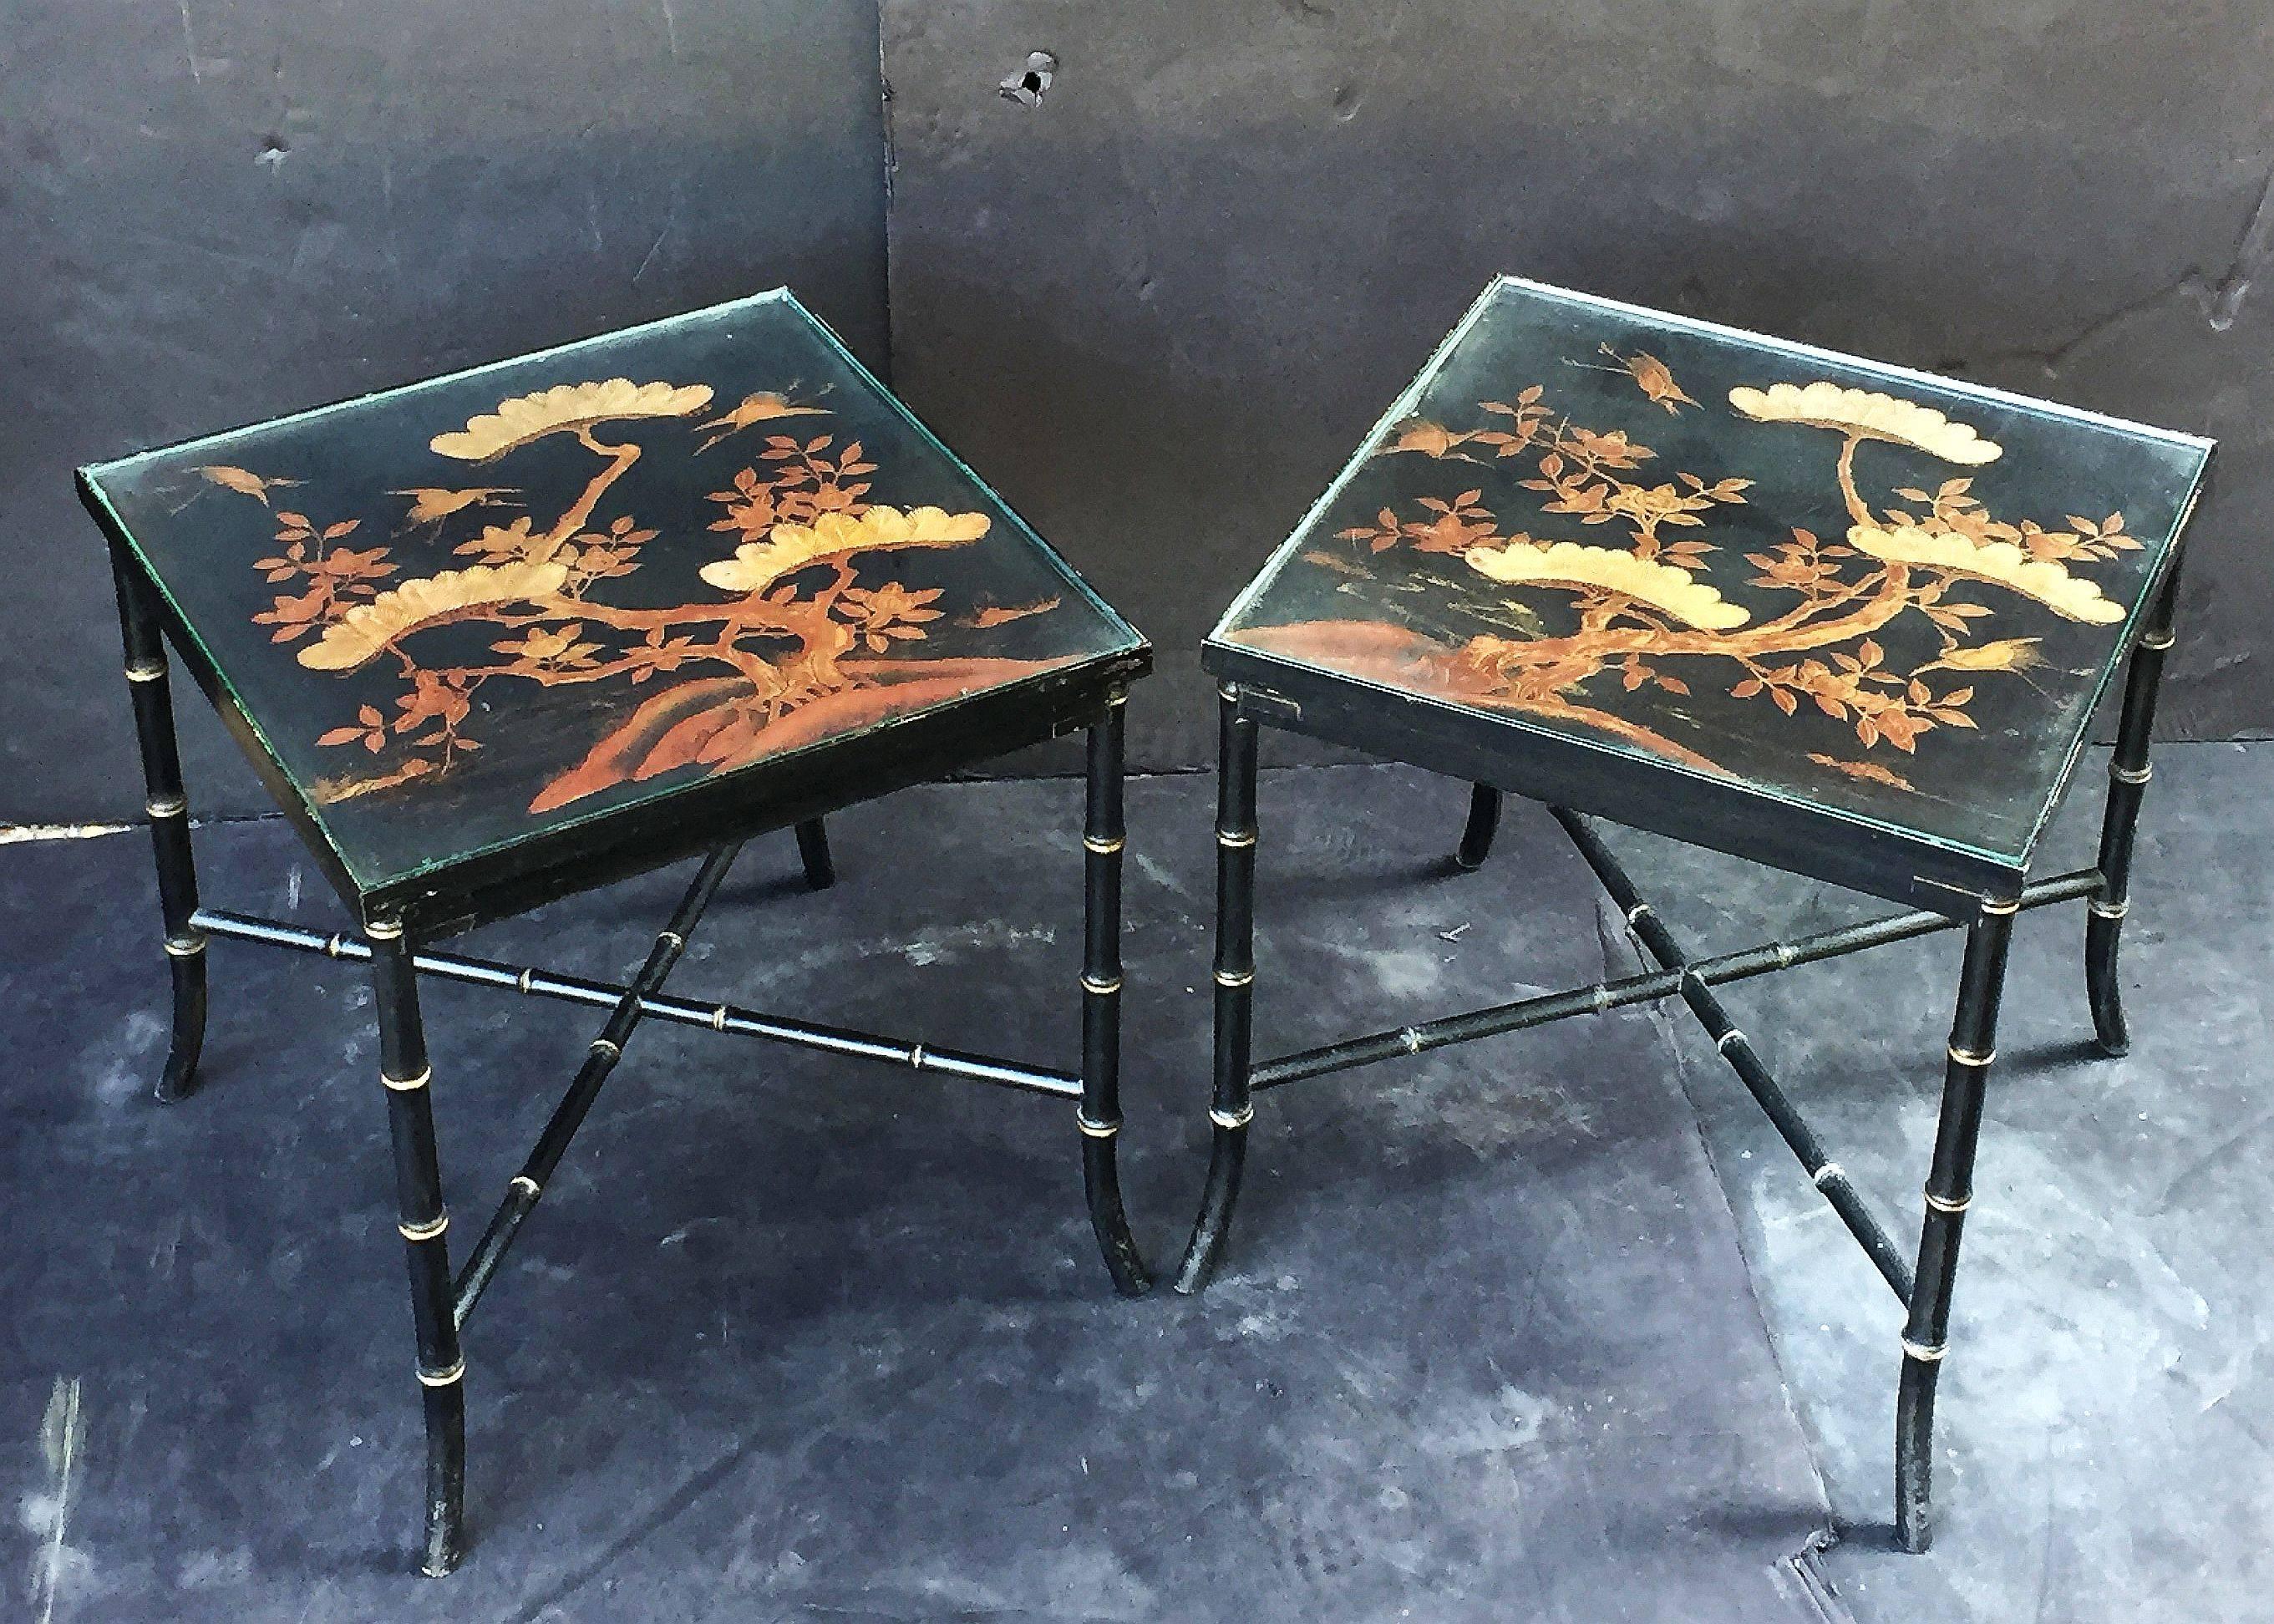 A fine pair of English low (coffee or cocktail) tables, each table featuring a square inset top with a japan-lacquered chinoiserie design of trees and birds, topped with a removable glass insert, and set upon an ebonized four-legged stretcher base,